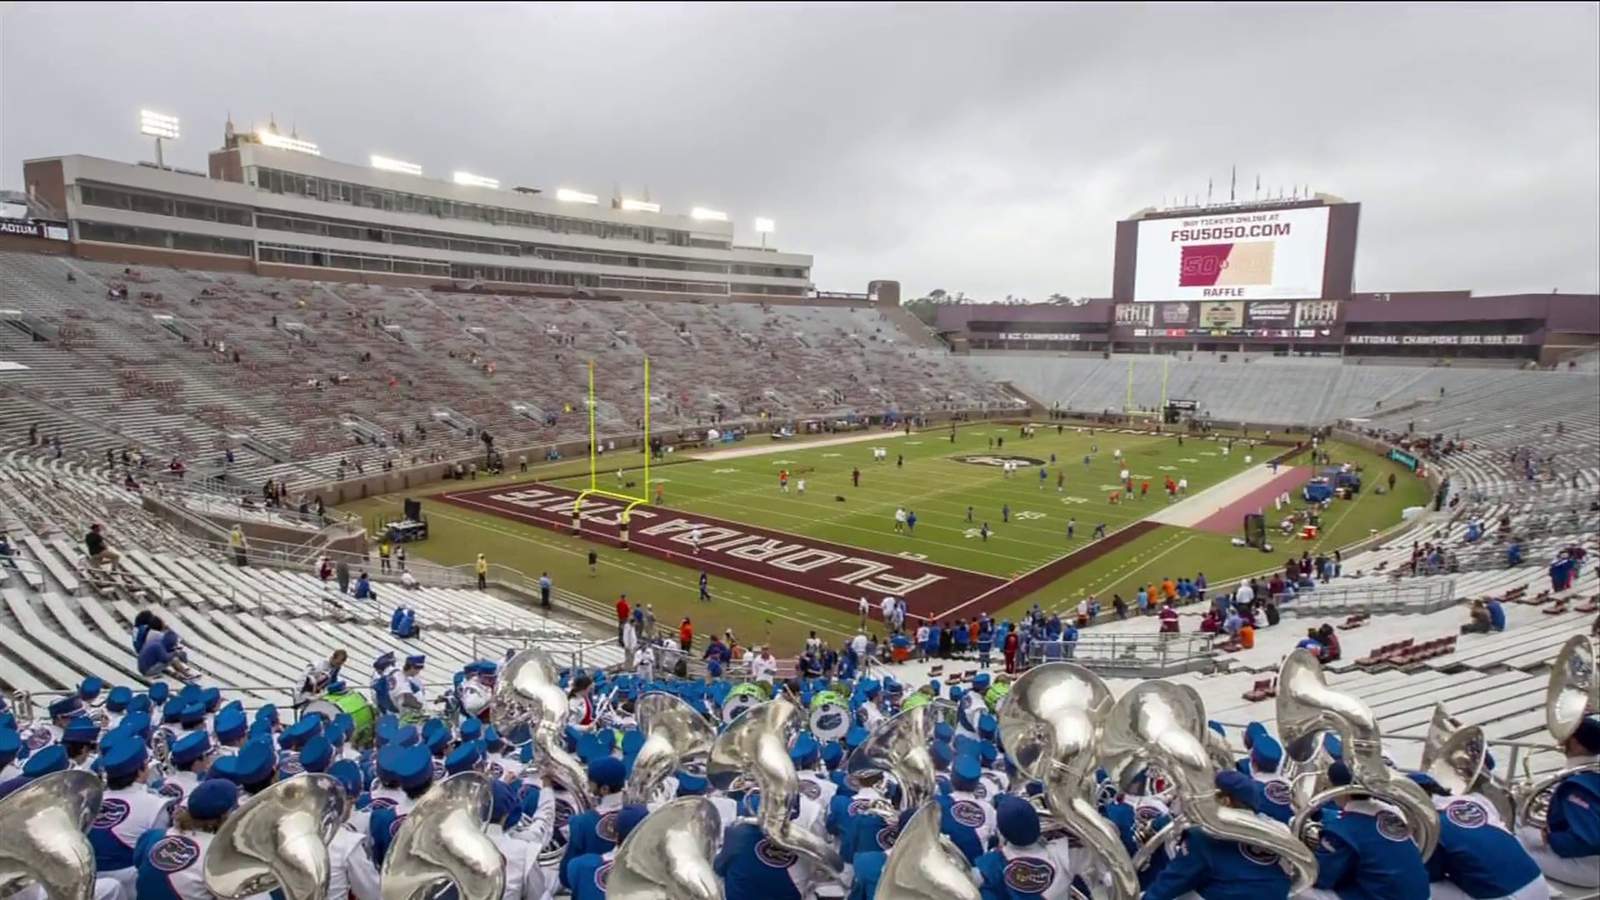 Former Seminole who started petition to change stadium name says now is time for FSU to lead